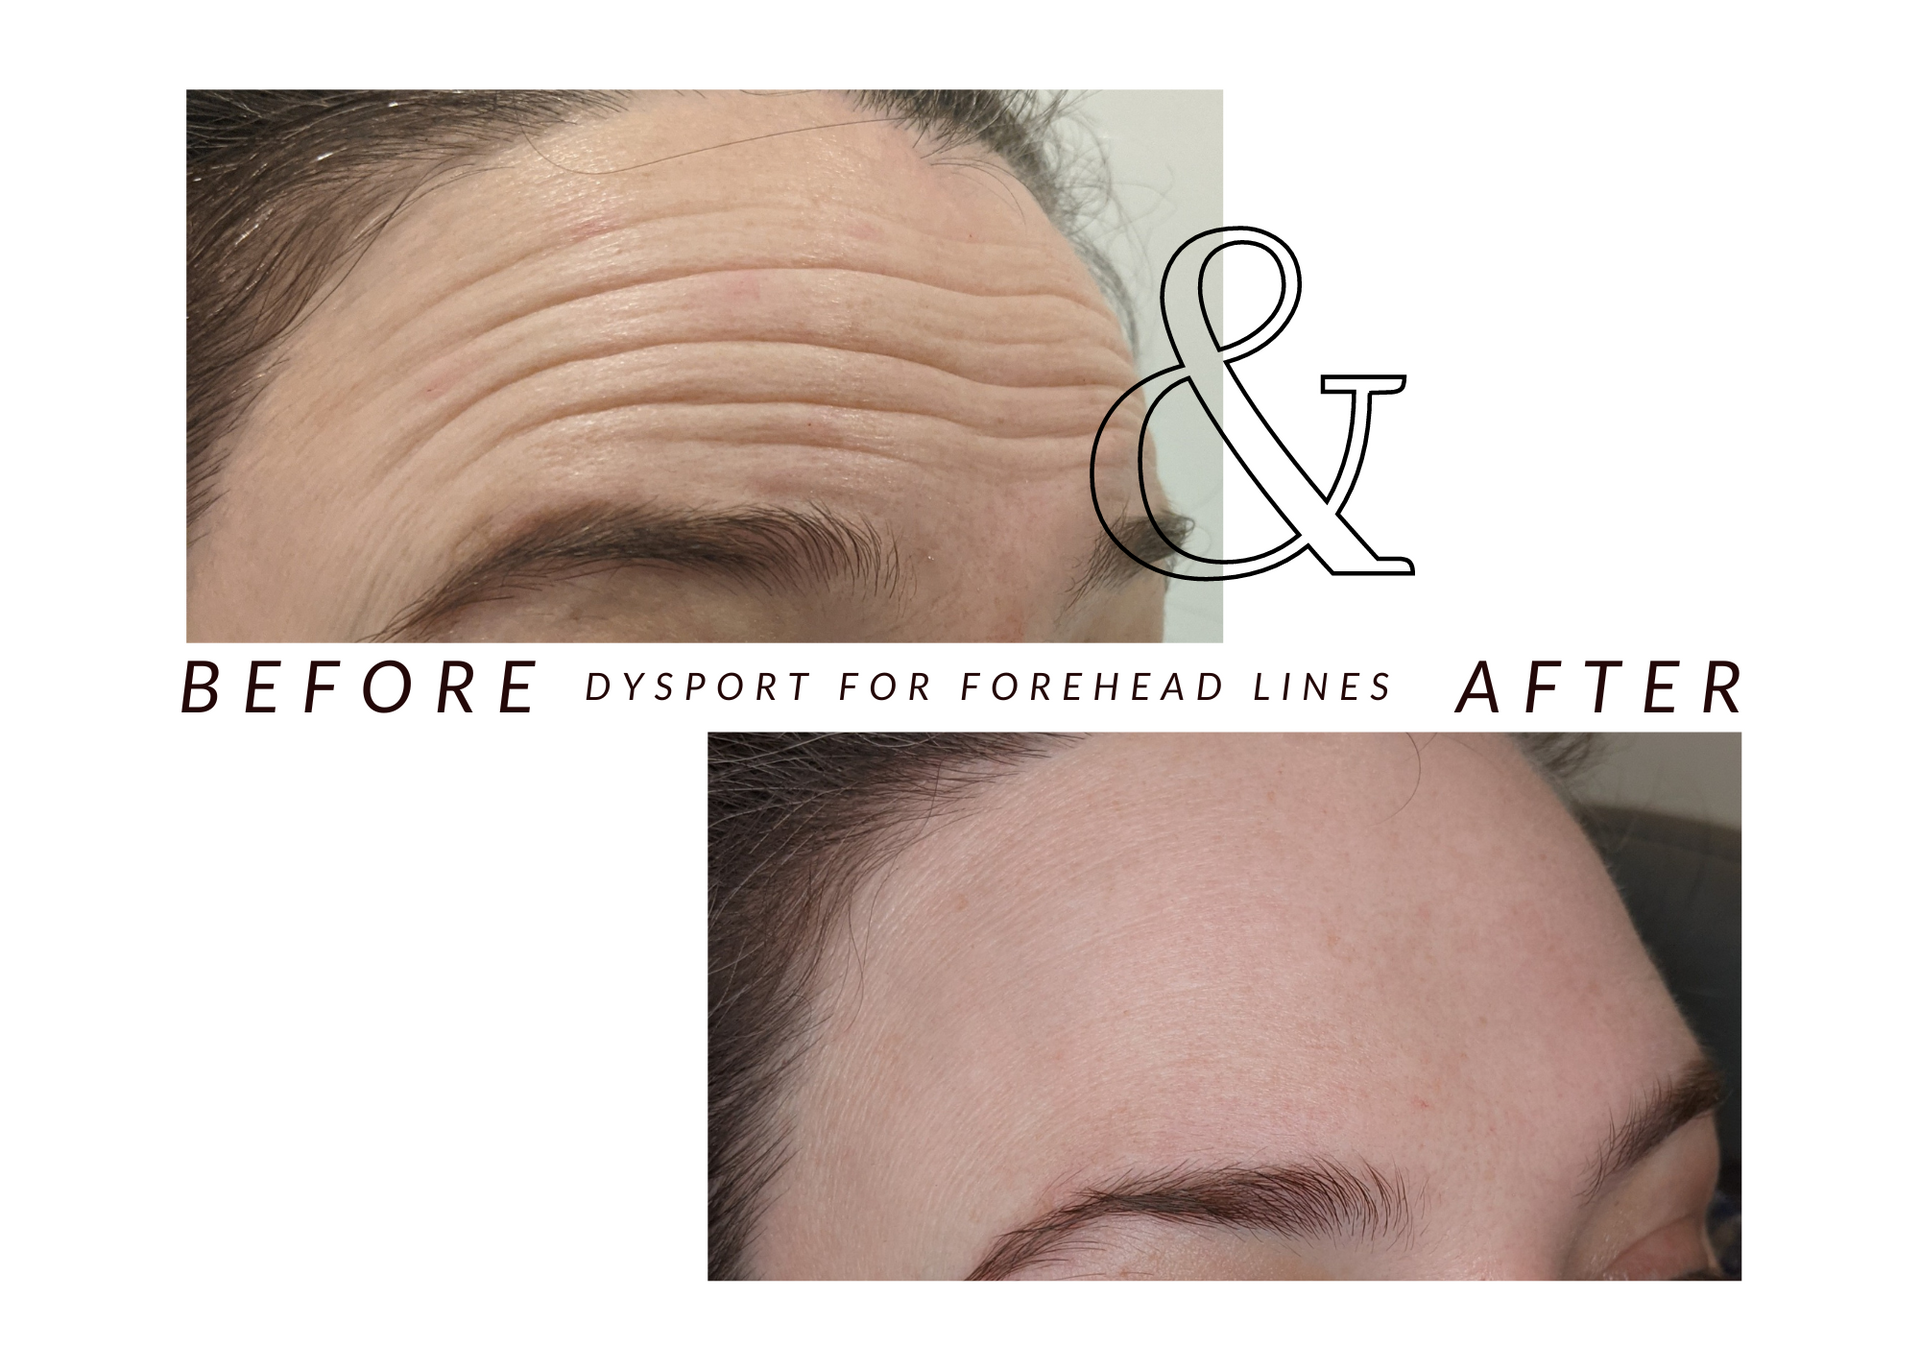 A before and after photo of a woman 's forehead lines